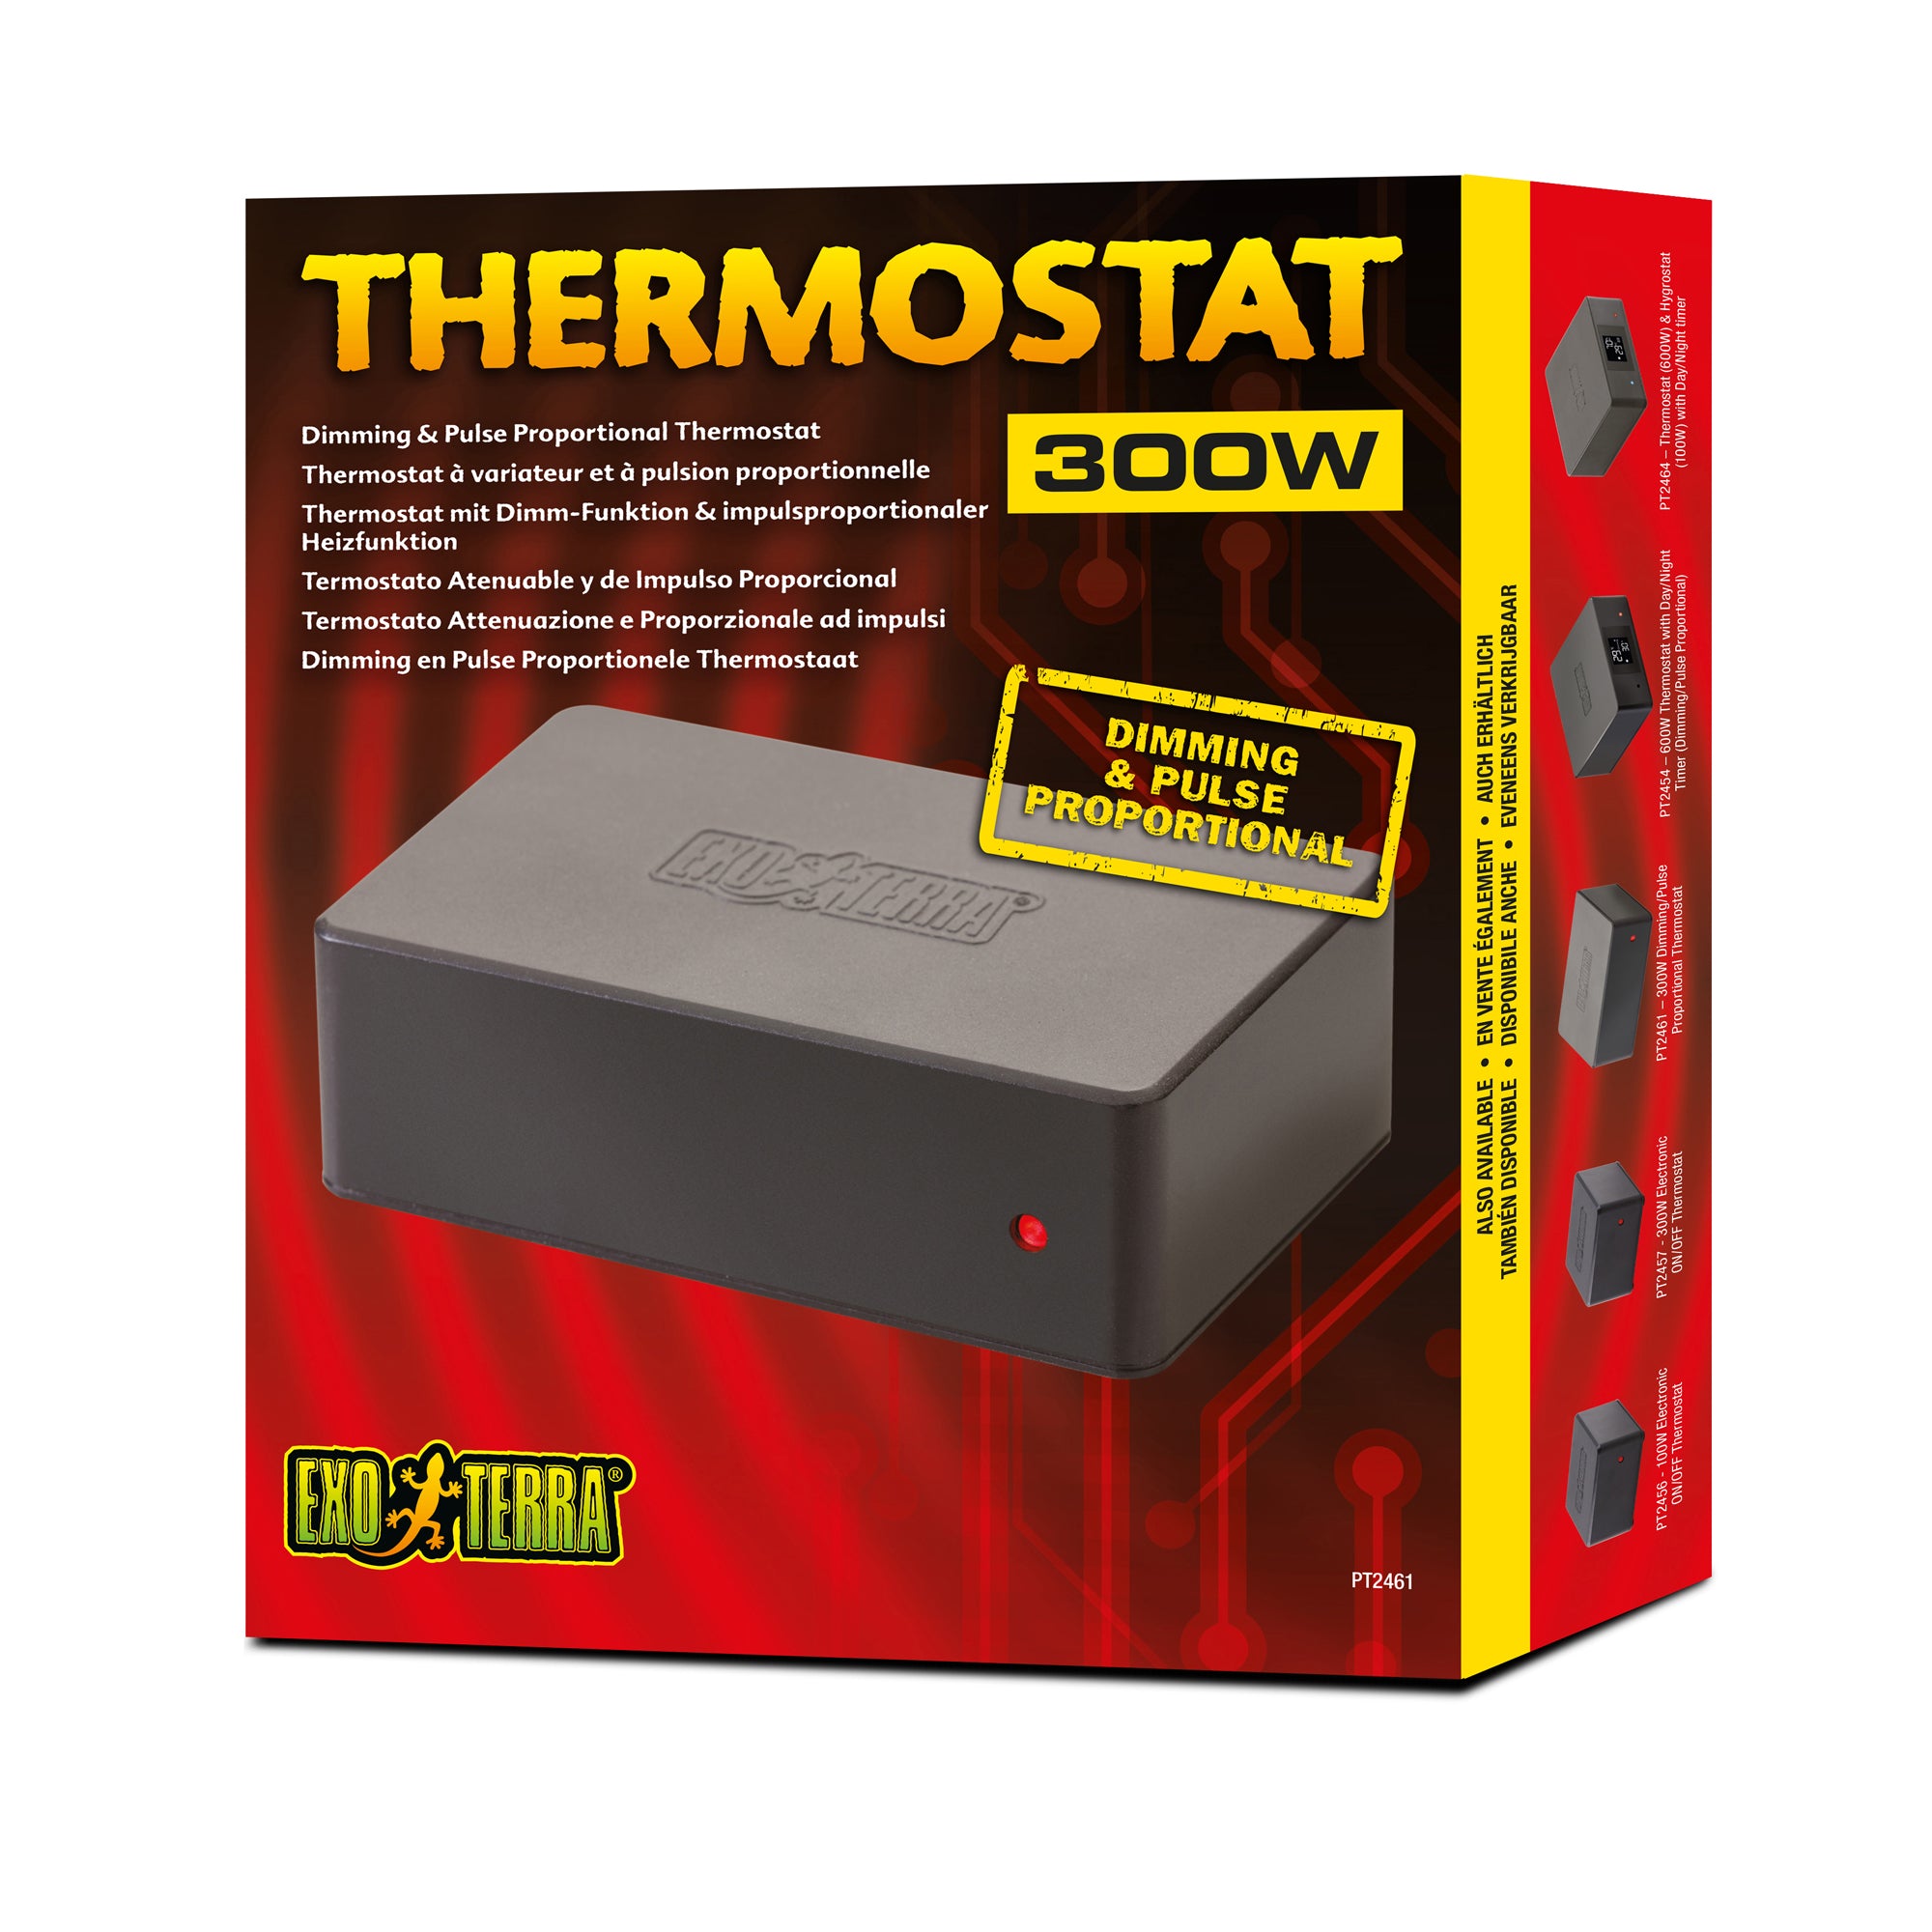 Exo Terra Dimming & Pulse Proportional Thermostat - 300 W